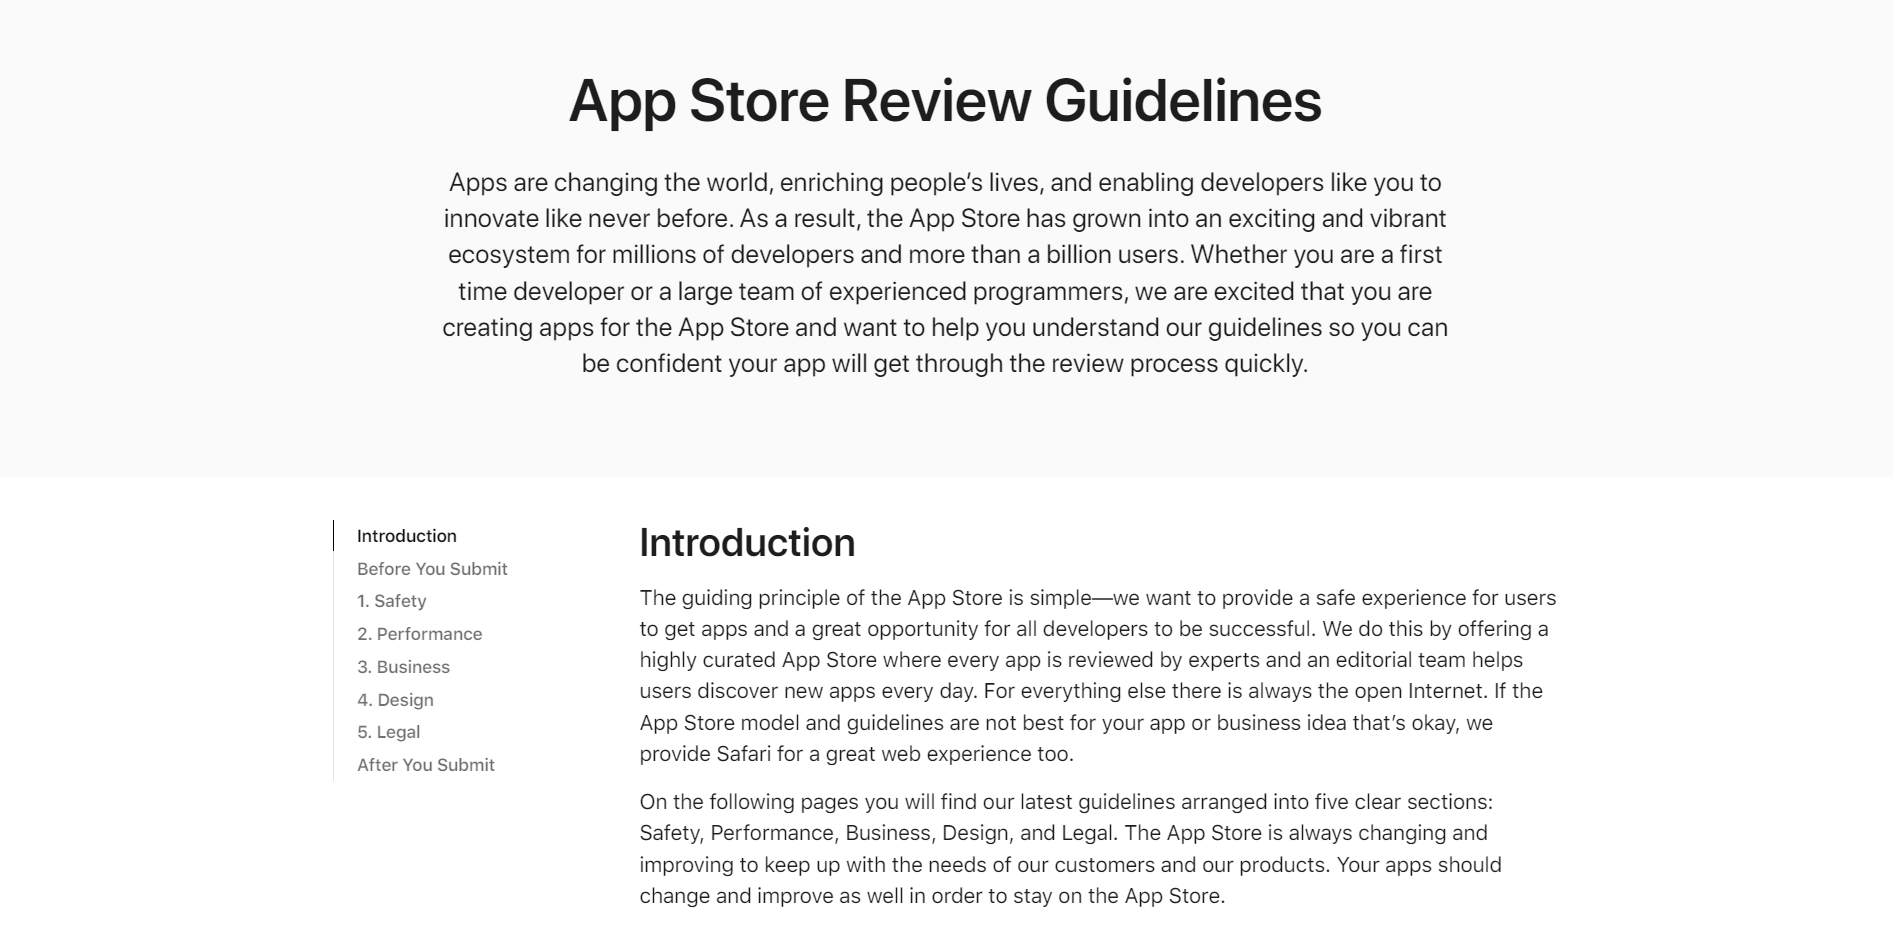 Mobile apps must adhere to app store guidelines before being approved for distribution.